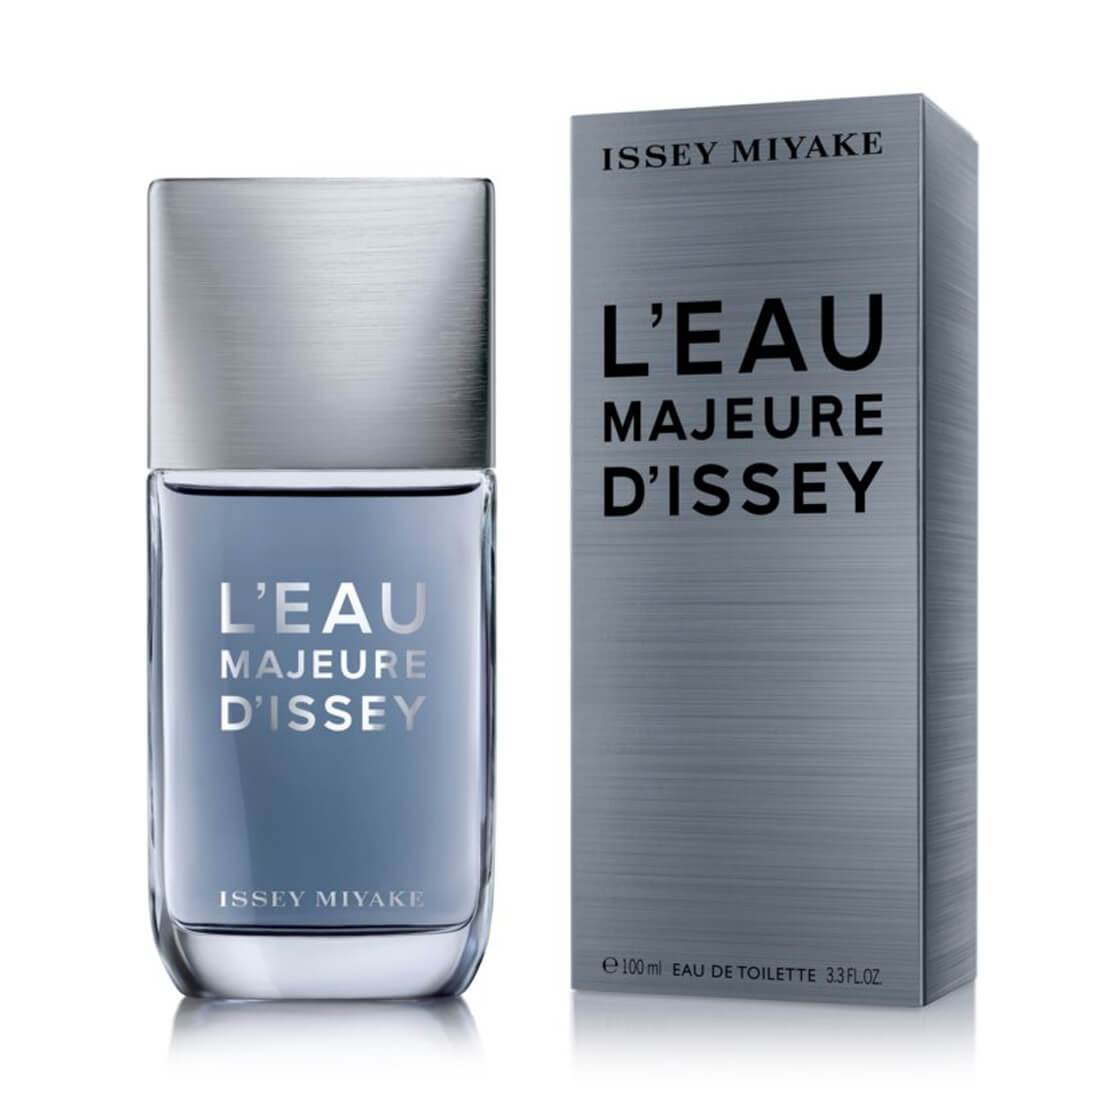 Issey Miyake L'Eau Majeure D'Issey Edt Perfume For Men - 100Ml